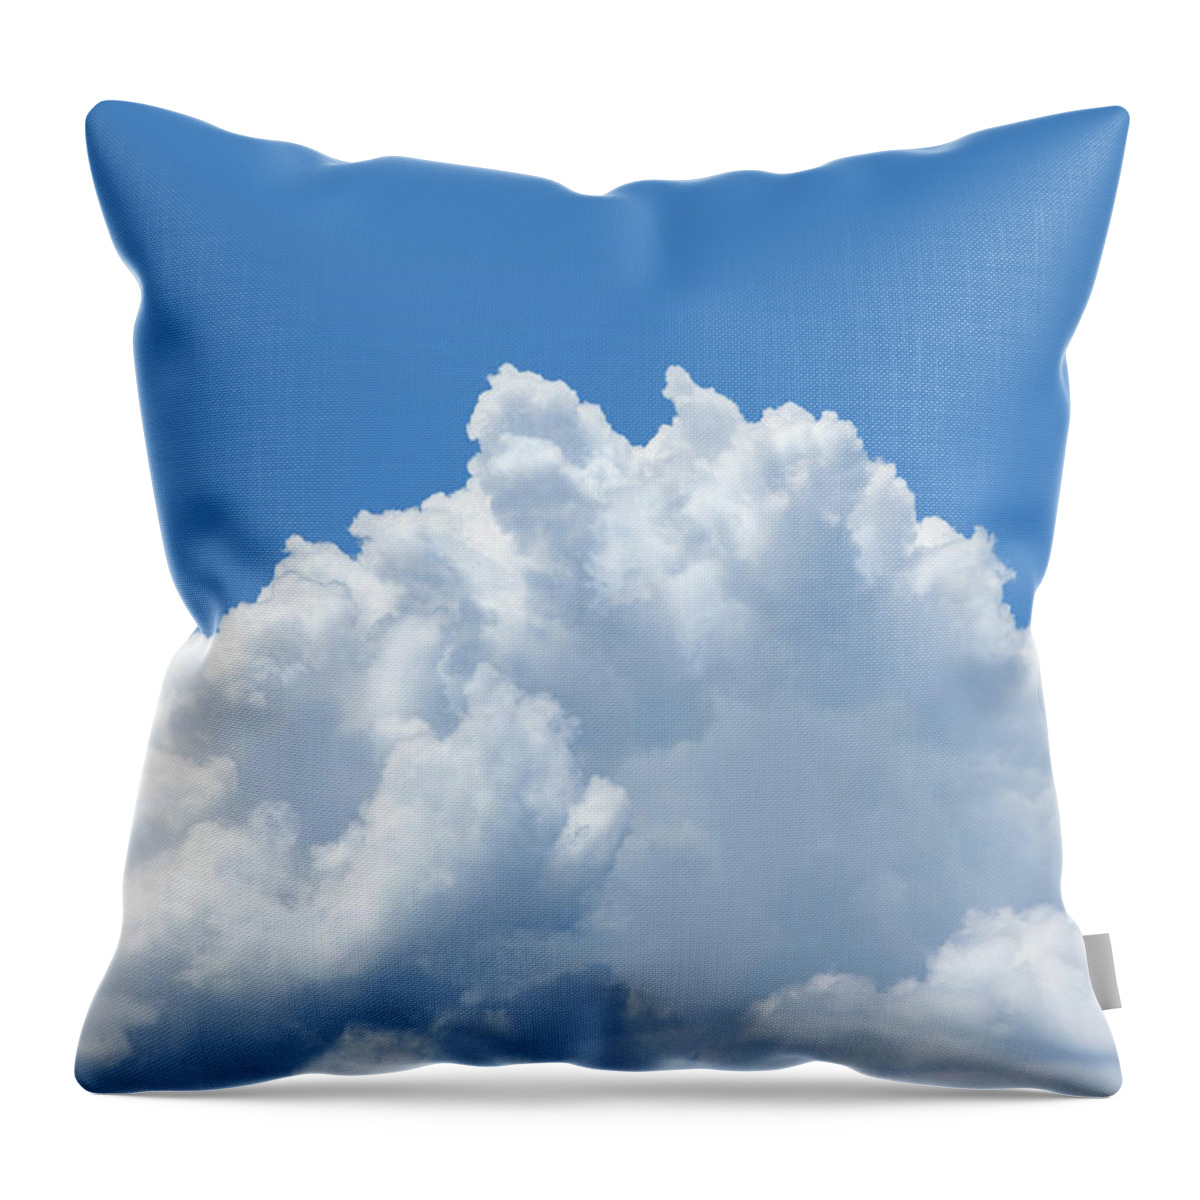 Scenics Throw Pillow featuring the photograph Big White Cumulus Cloud With Blue Sky by Grafissimo